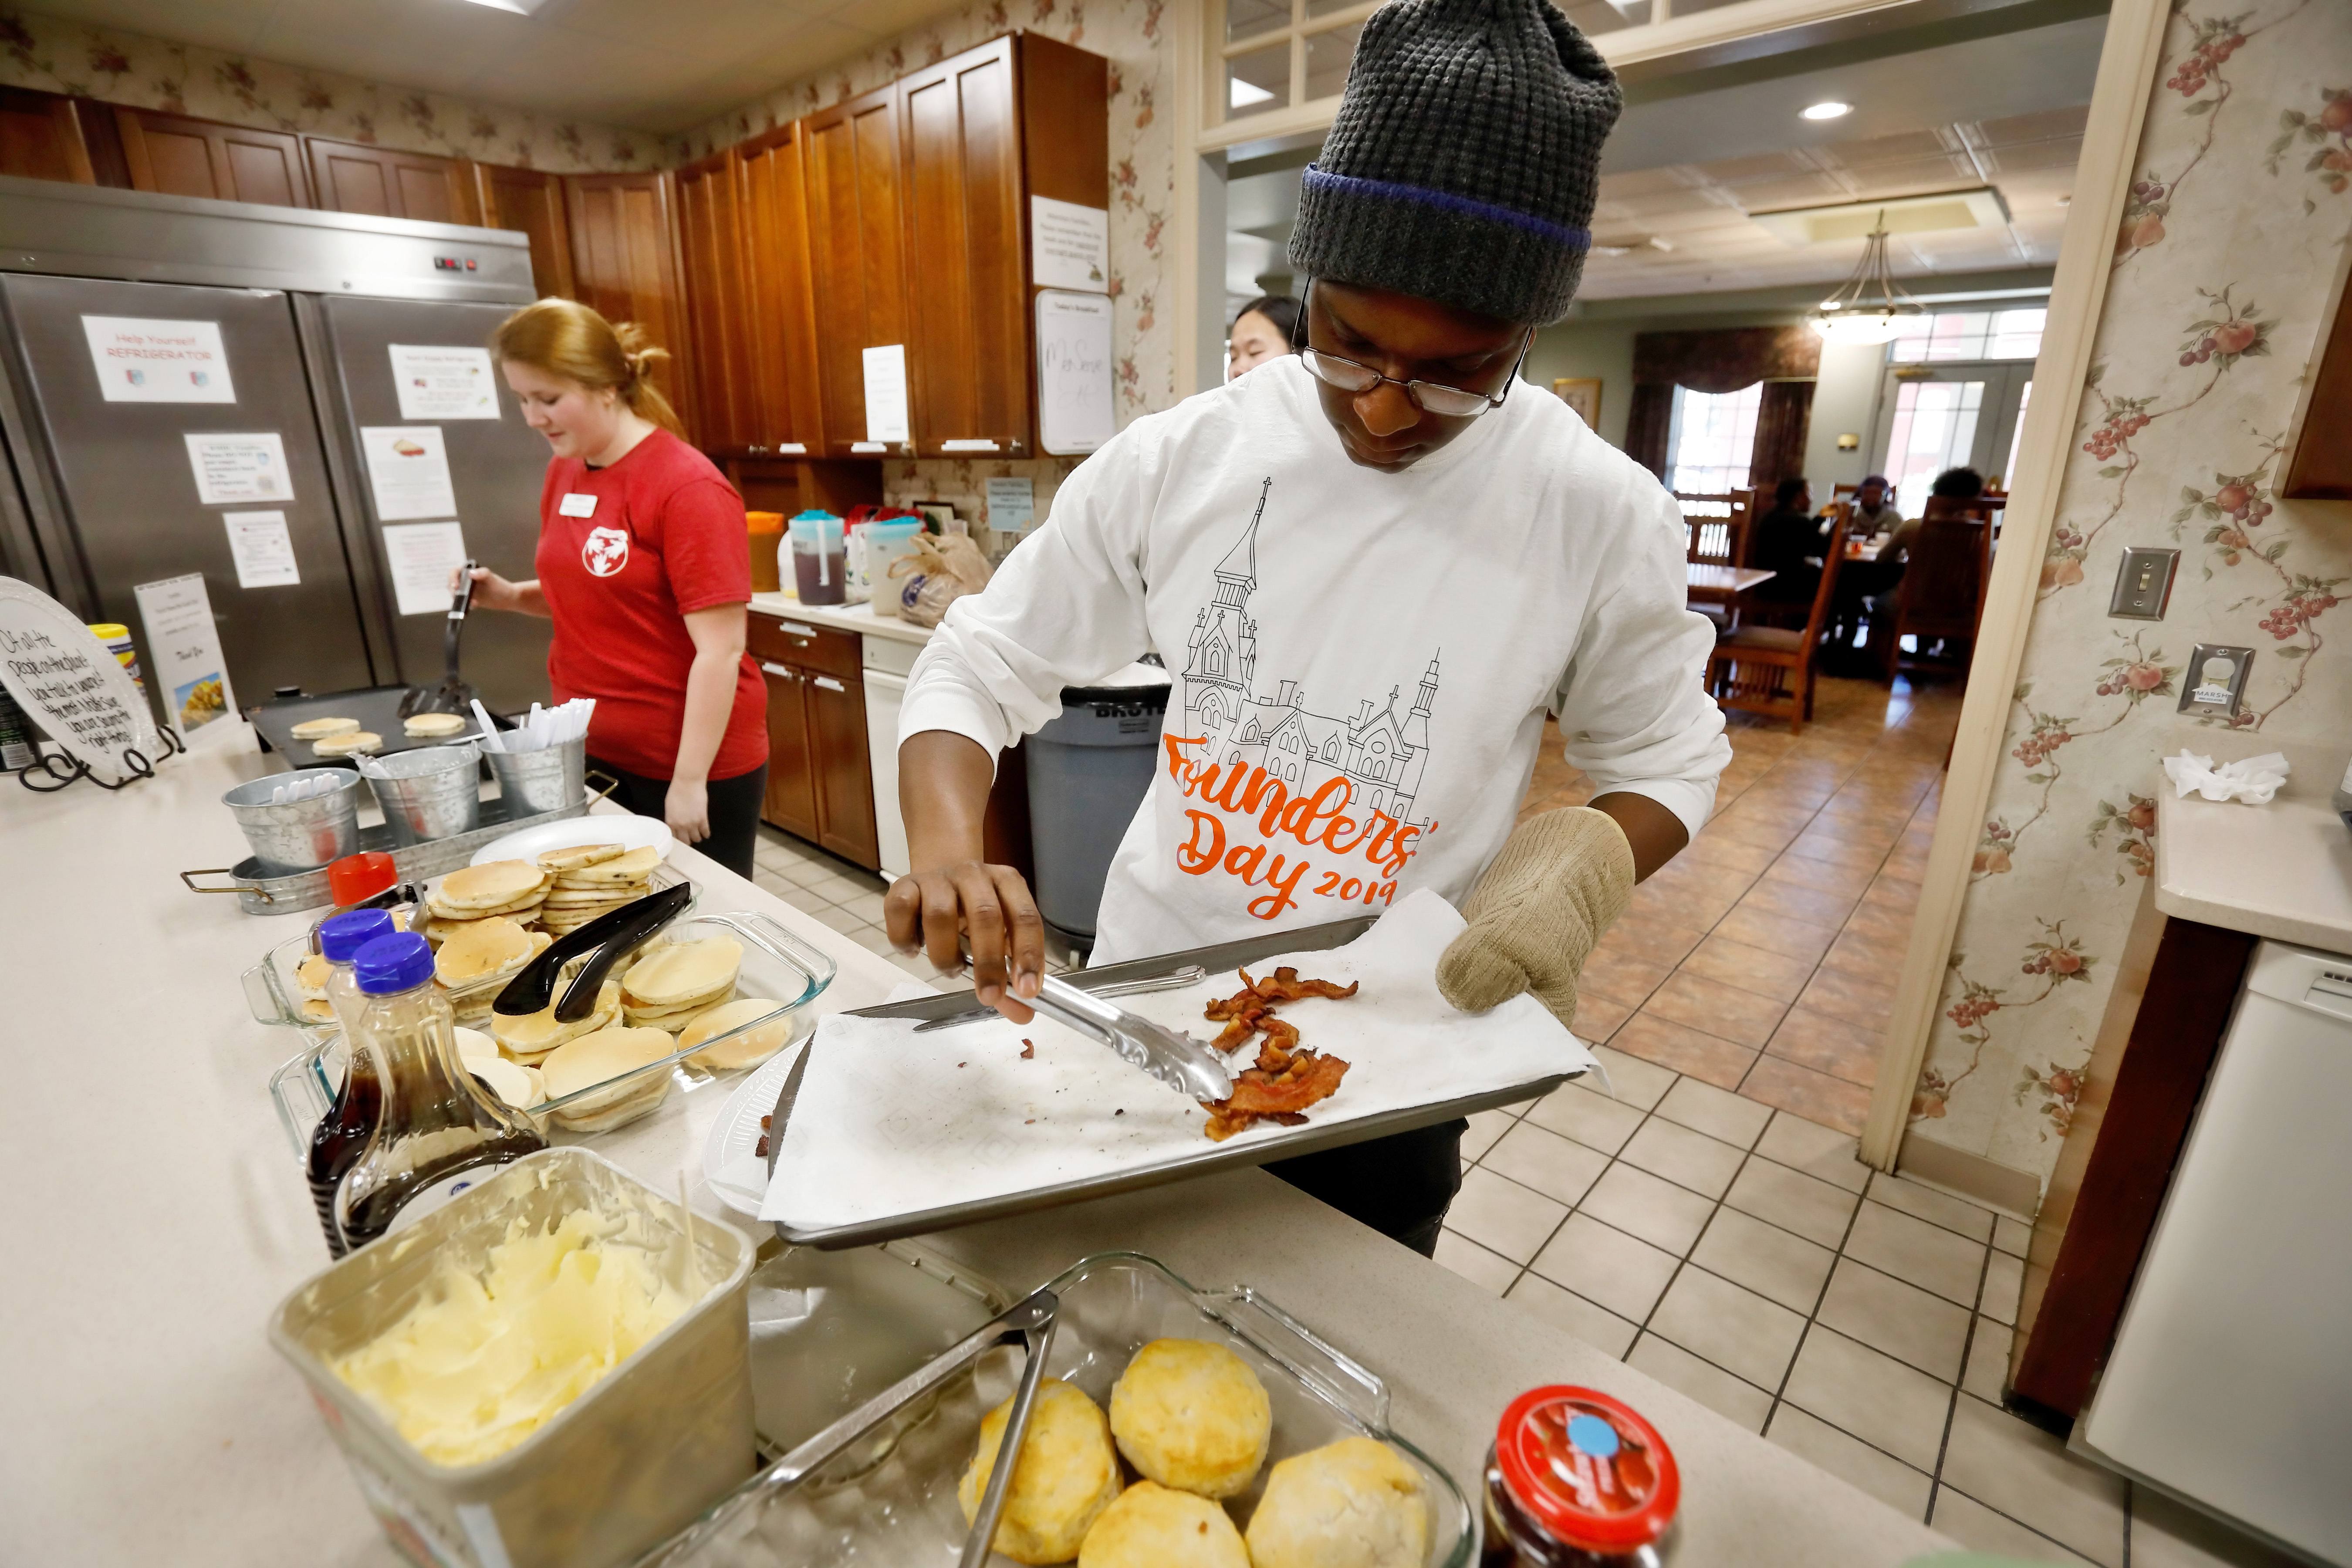 Mercer students prepared and served breakfast for families at the Ronald McDonald House on March 5, as part of MerServe's Spring Break for Service. 